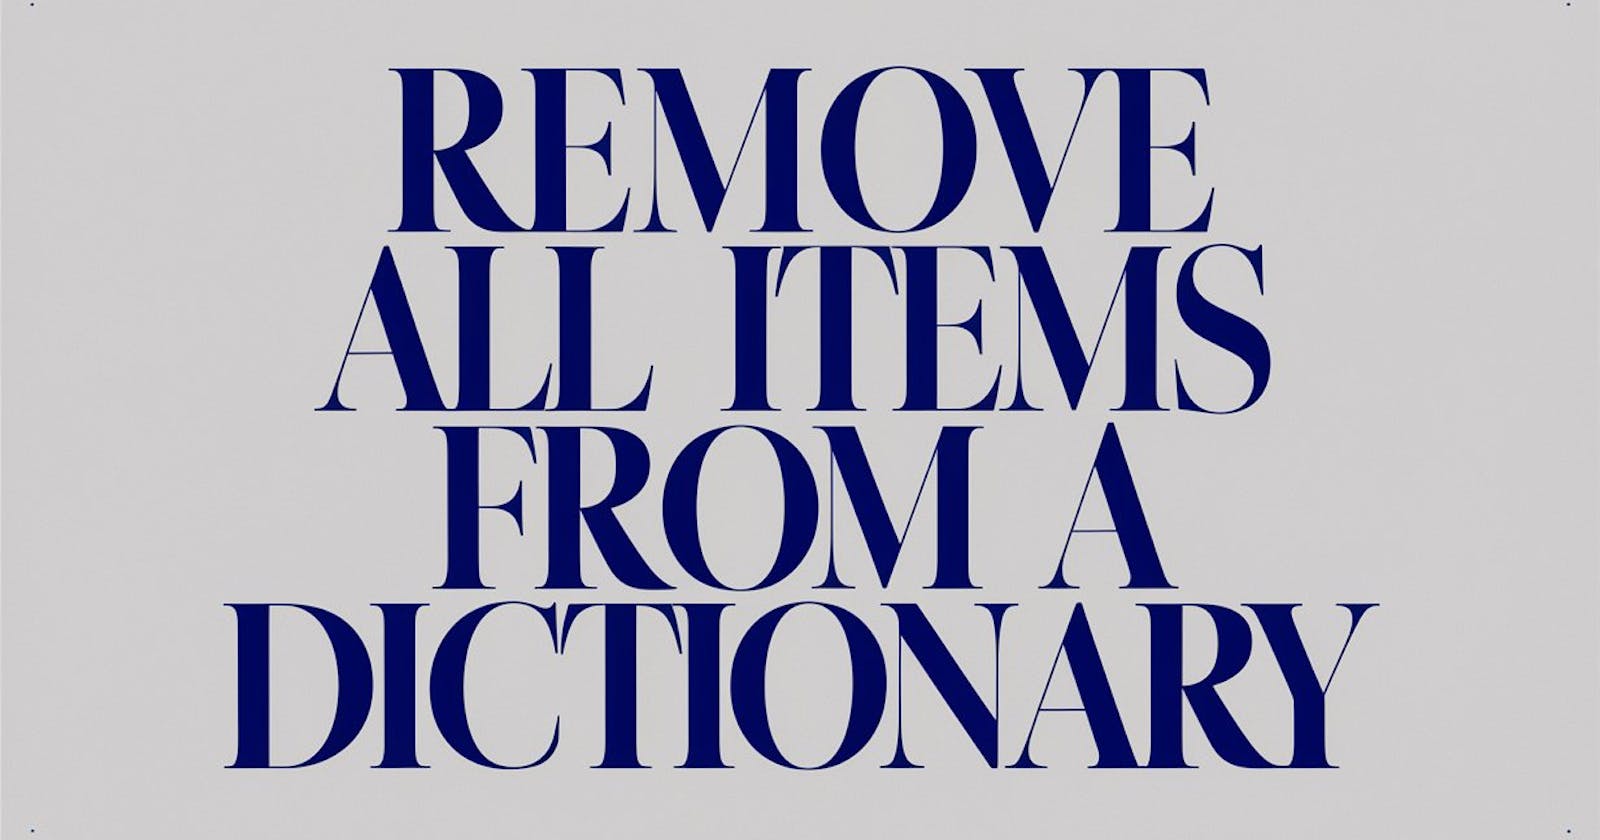 How to Remove All Items from a Dictionary: 5 Practical Examples